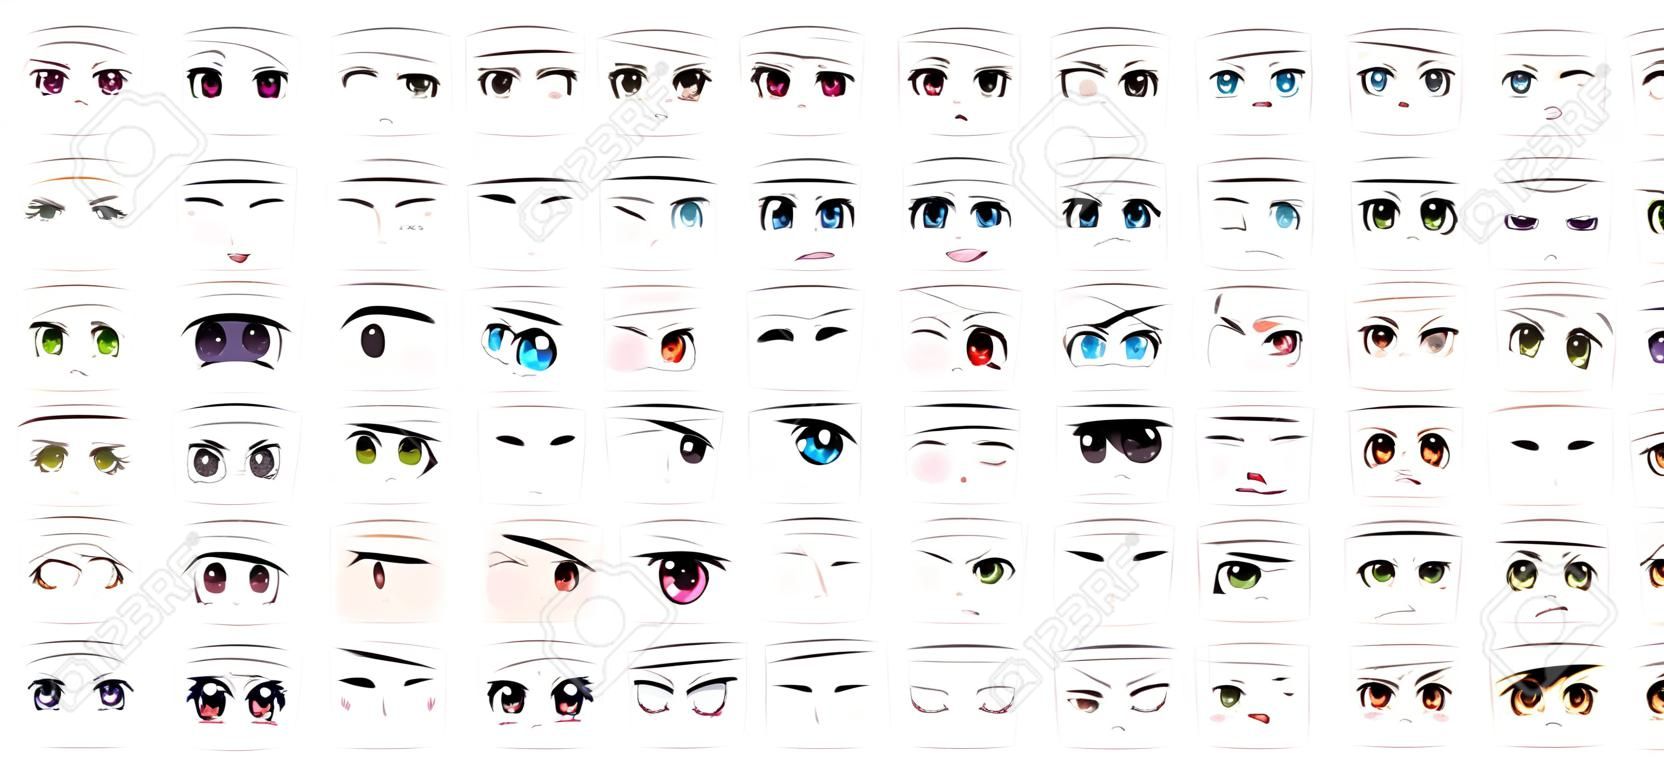 Set of Vector Cartoon Anime Style Expressions. Kawaii Cute Faces. Different Eyes, Mouth, Eyebrows. Joy. Anger. Calmness. Anime girl in japanese. Anime style, drawn vector illustration. Sketch. Big Set